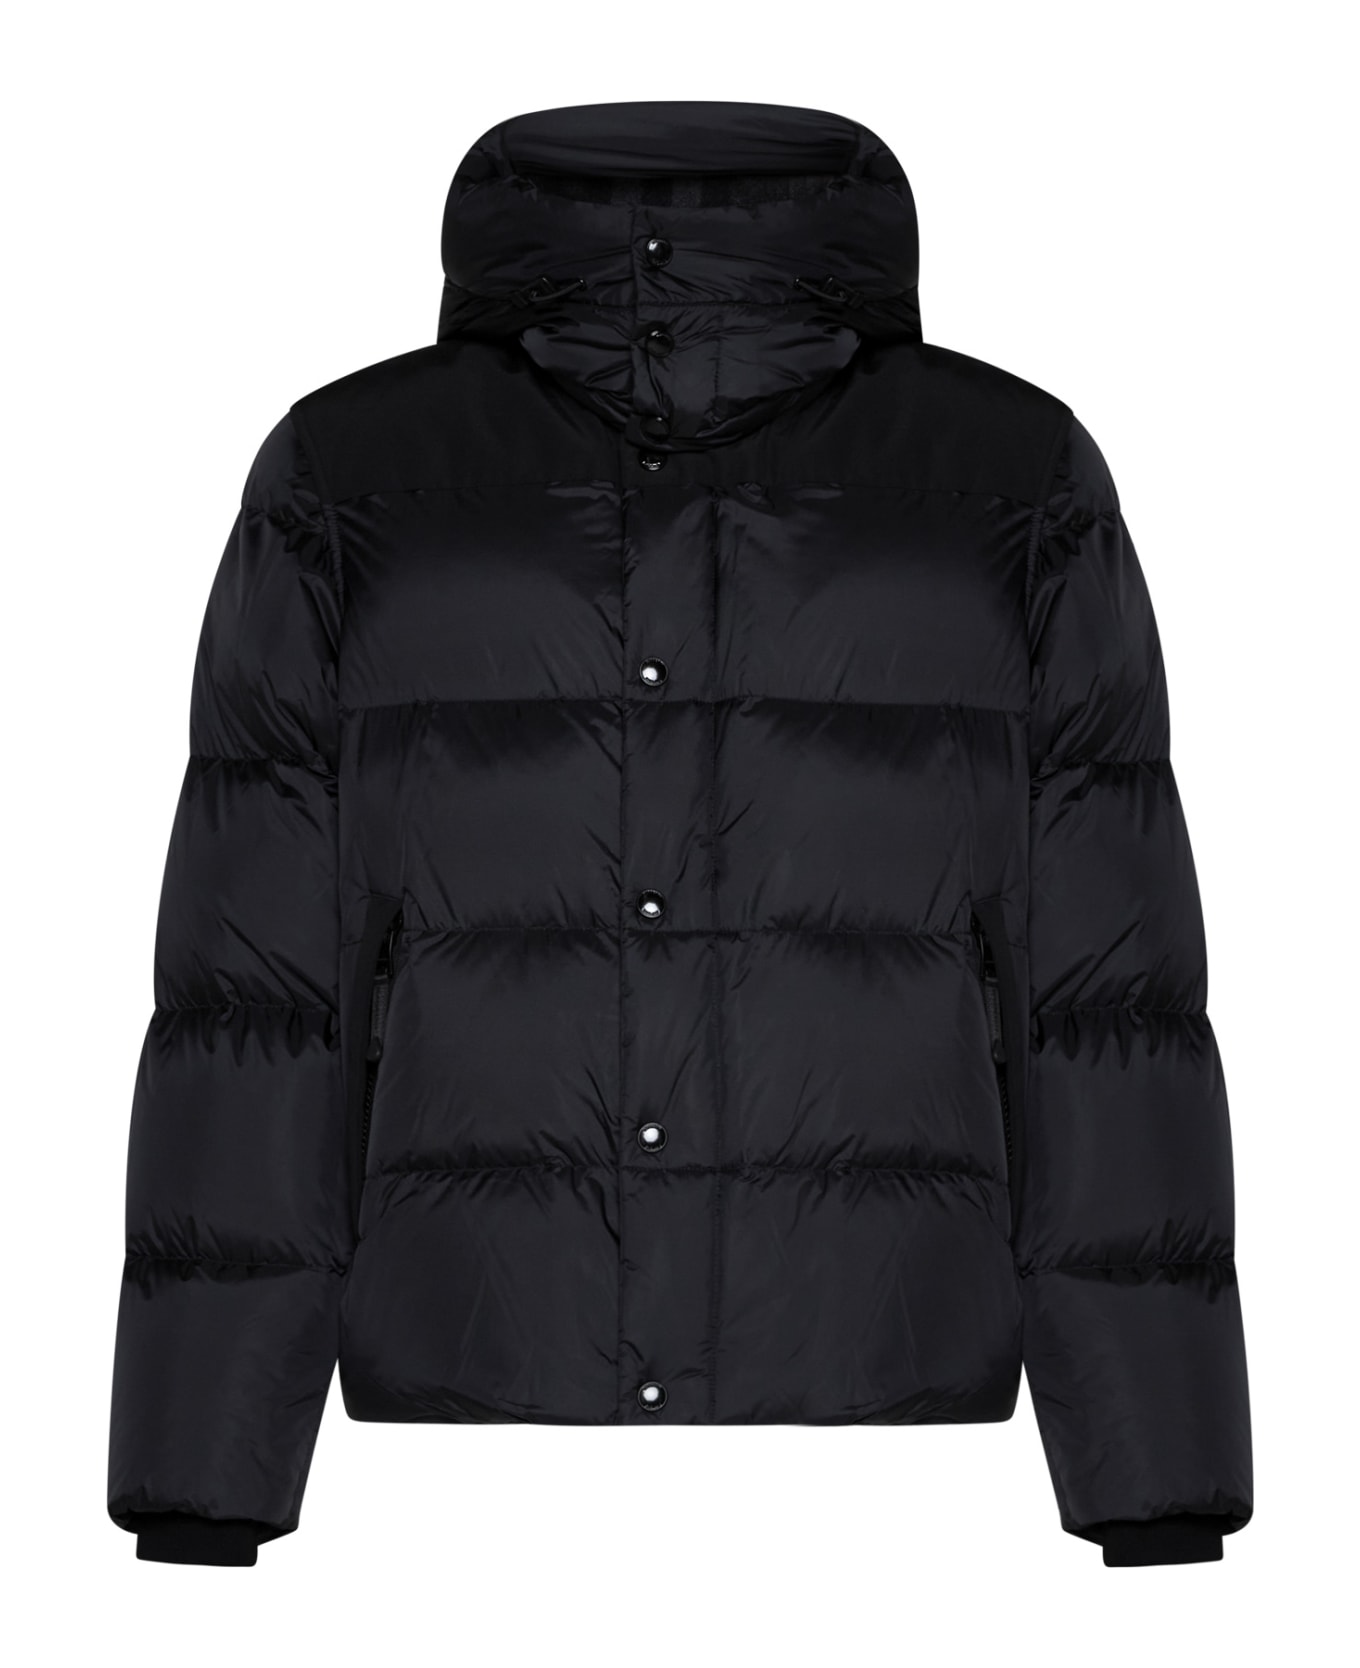 Burberry Logo Patch Hooded Coat - Black